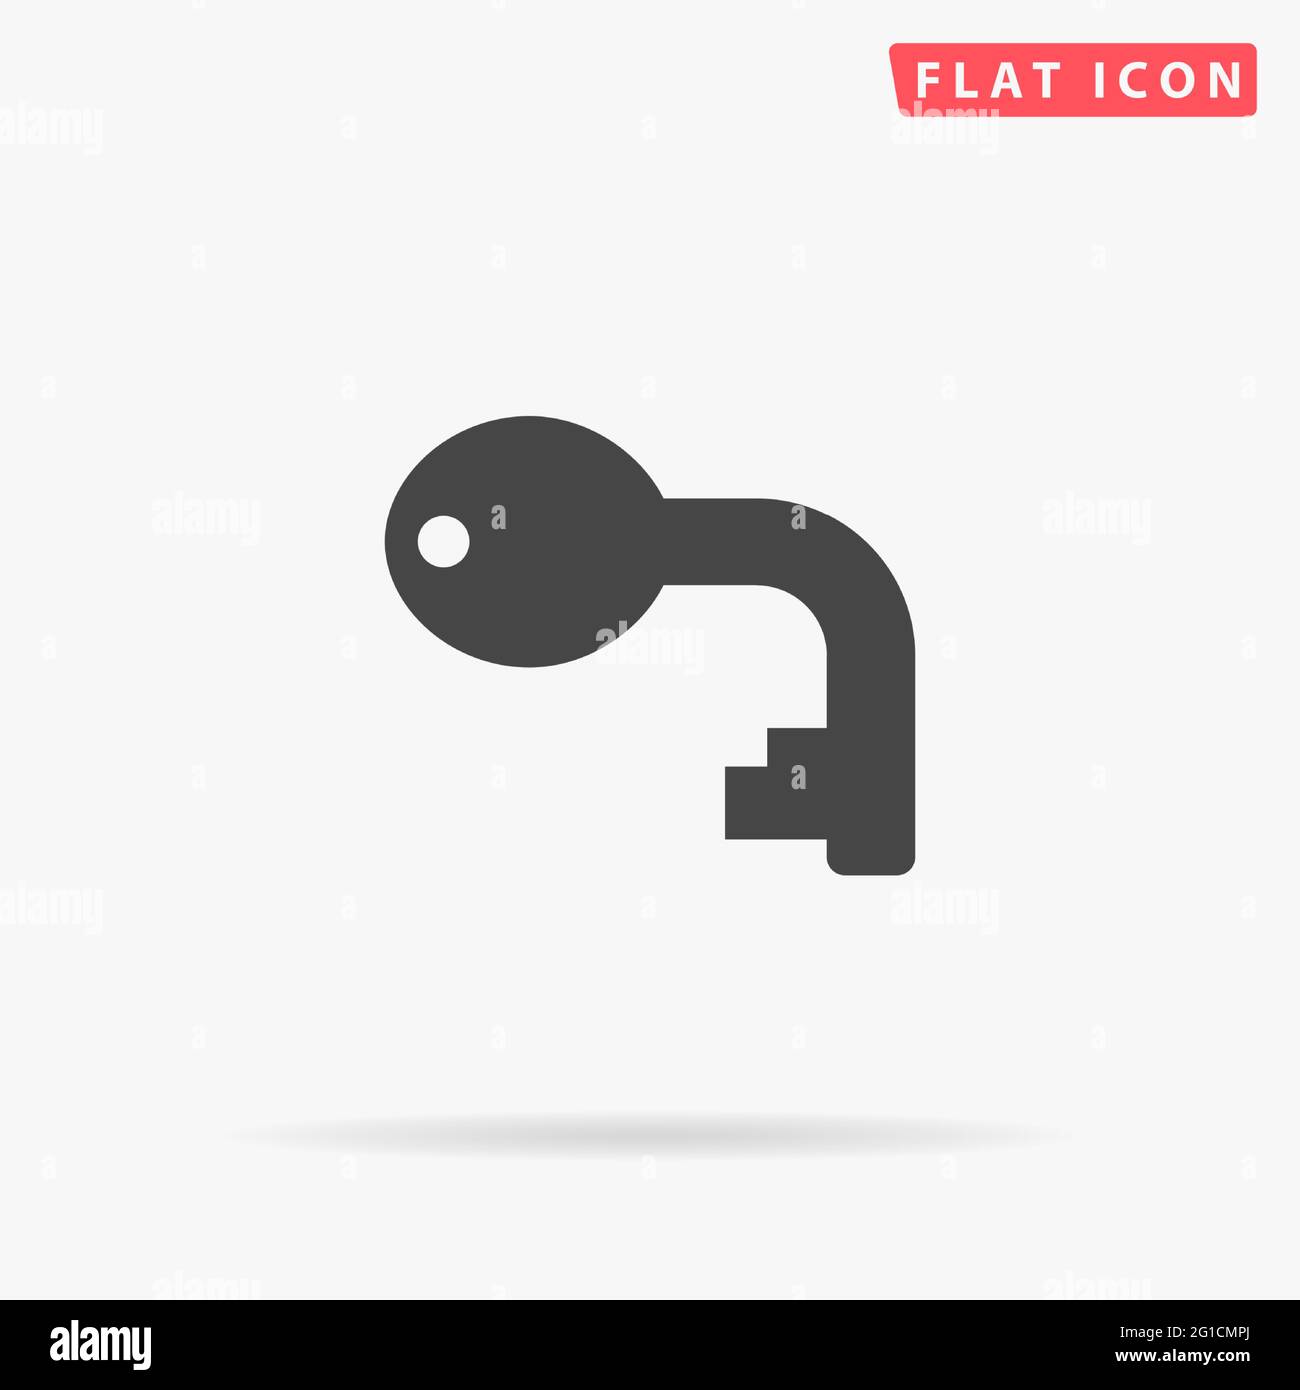 Curved Key flat vector icon. Hand drawn style design illustrations. Stock Vector